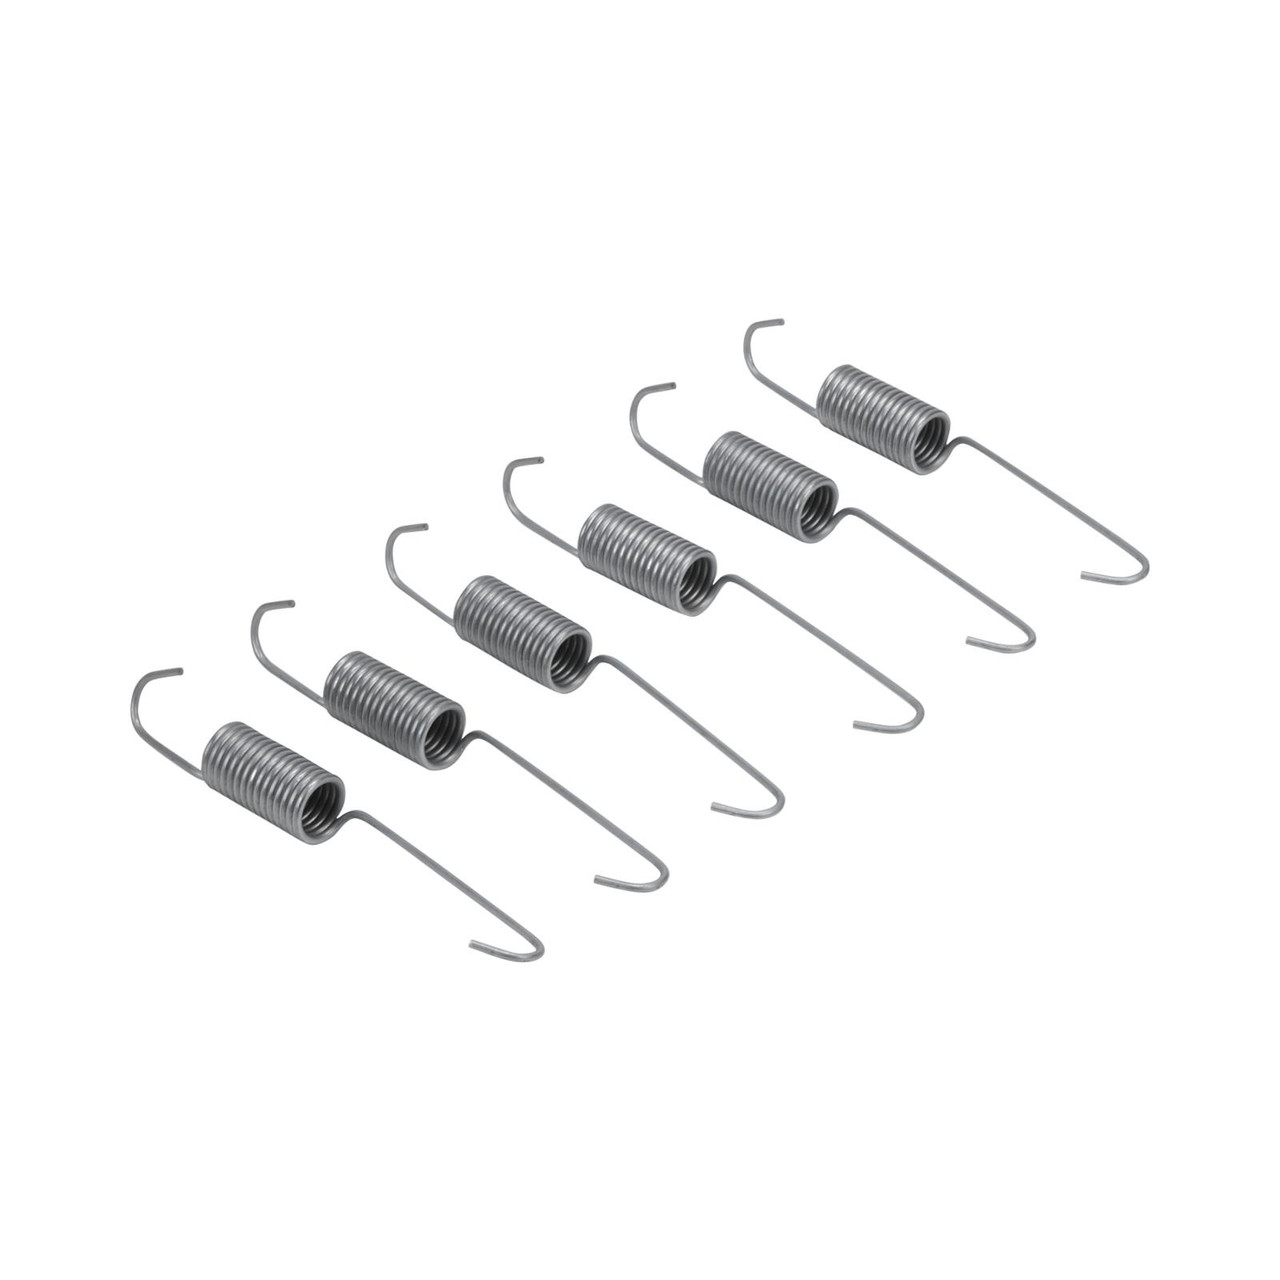 Whirlpool 12002773 - Top Load Washer Suspension Spring Kit, Set of 6